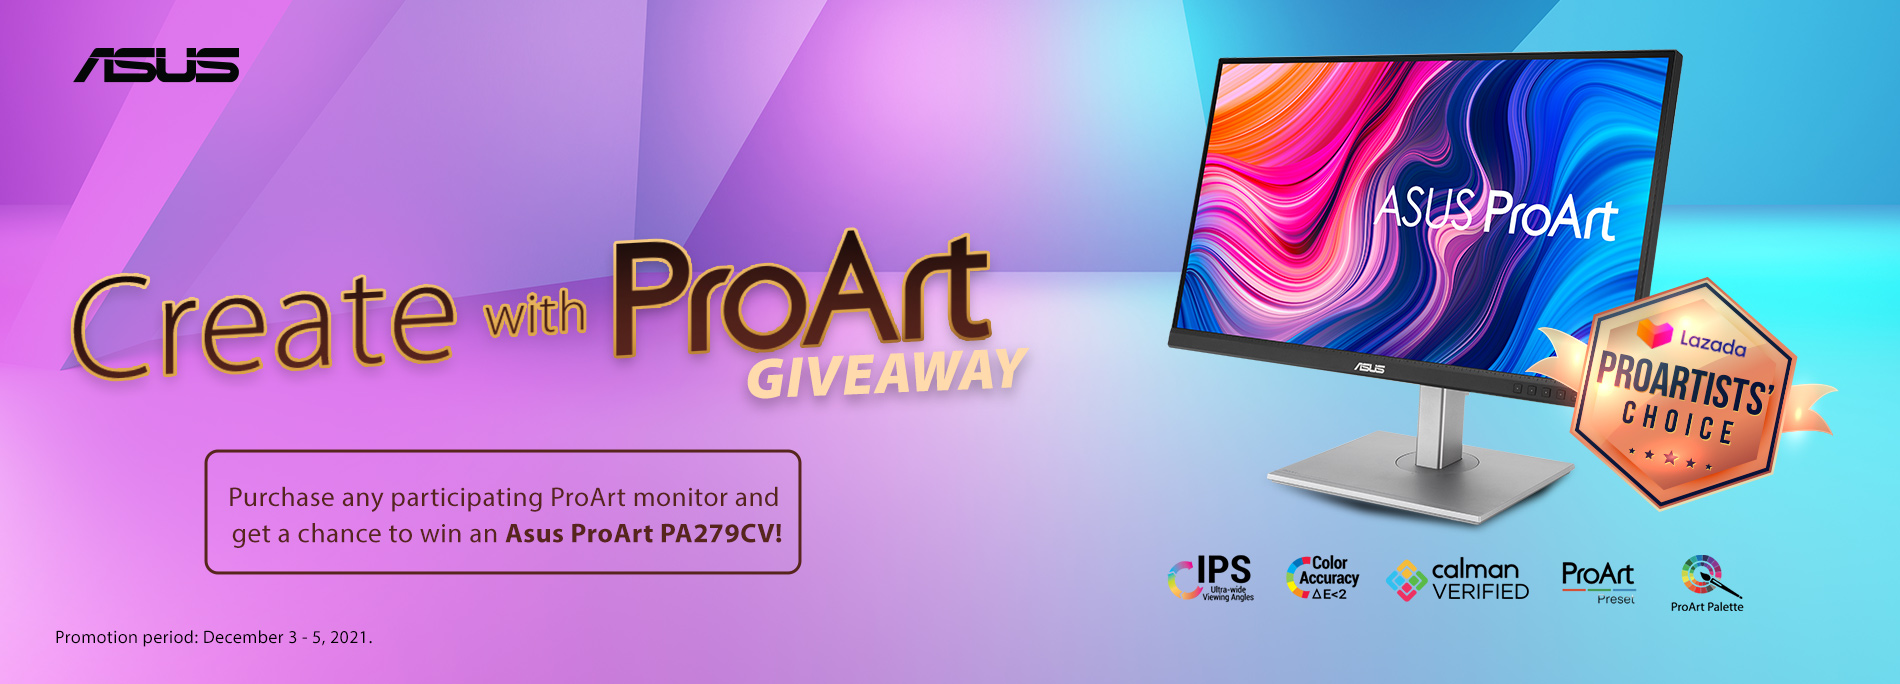 Create with ProArt Campaign Part 2 [Giveaway]